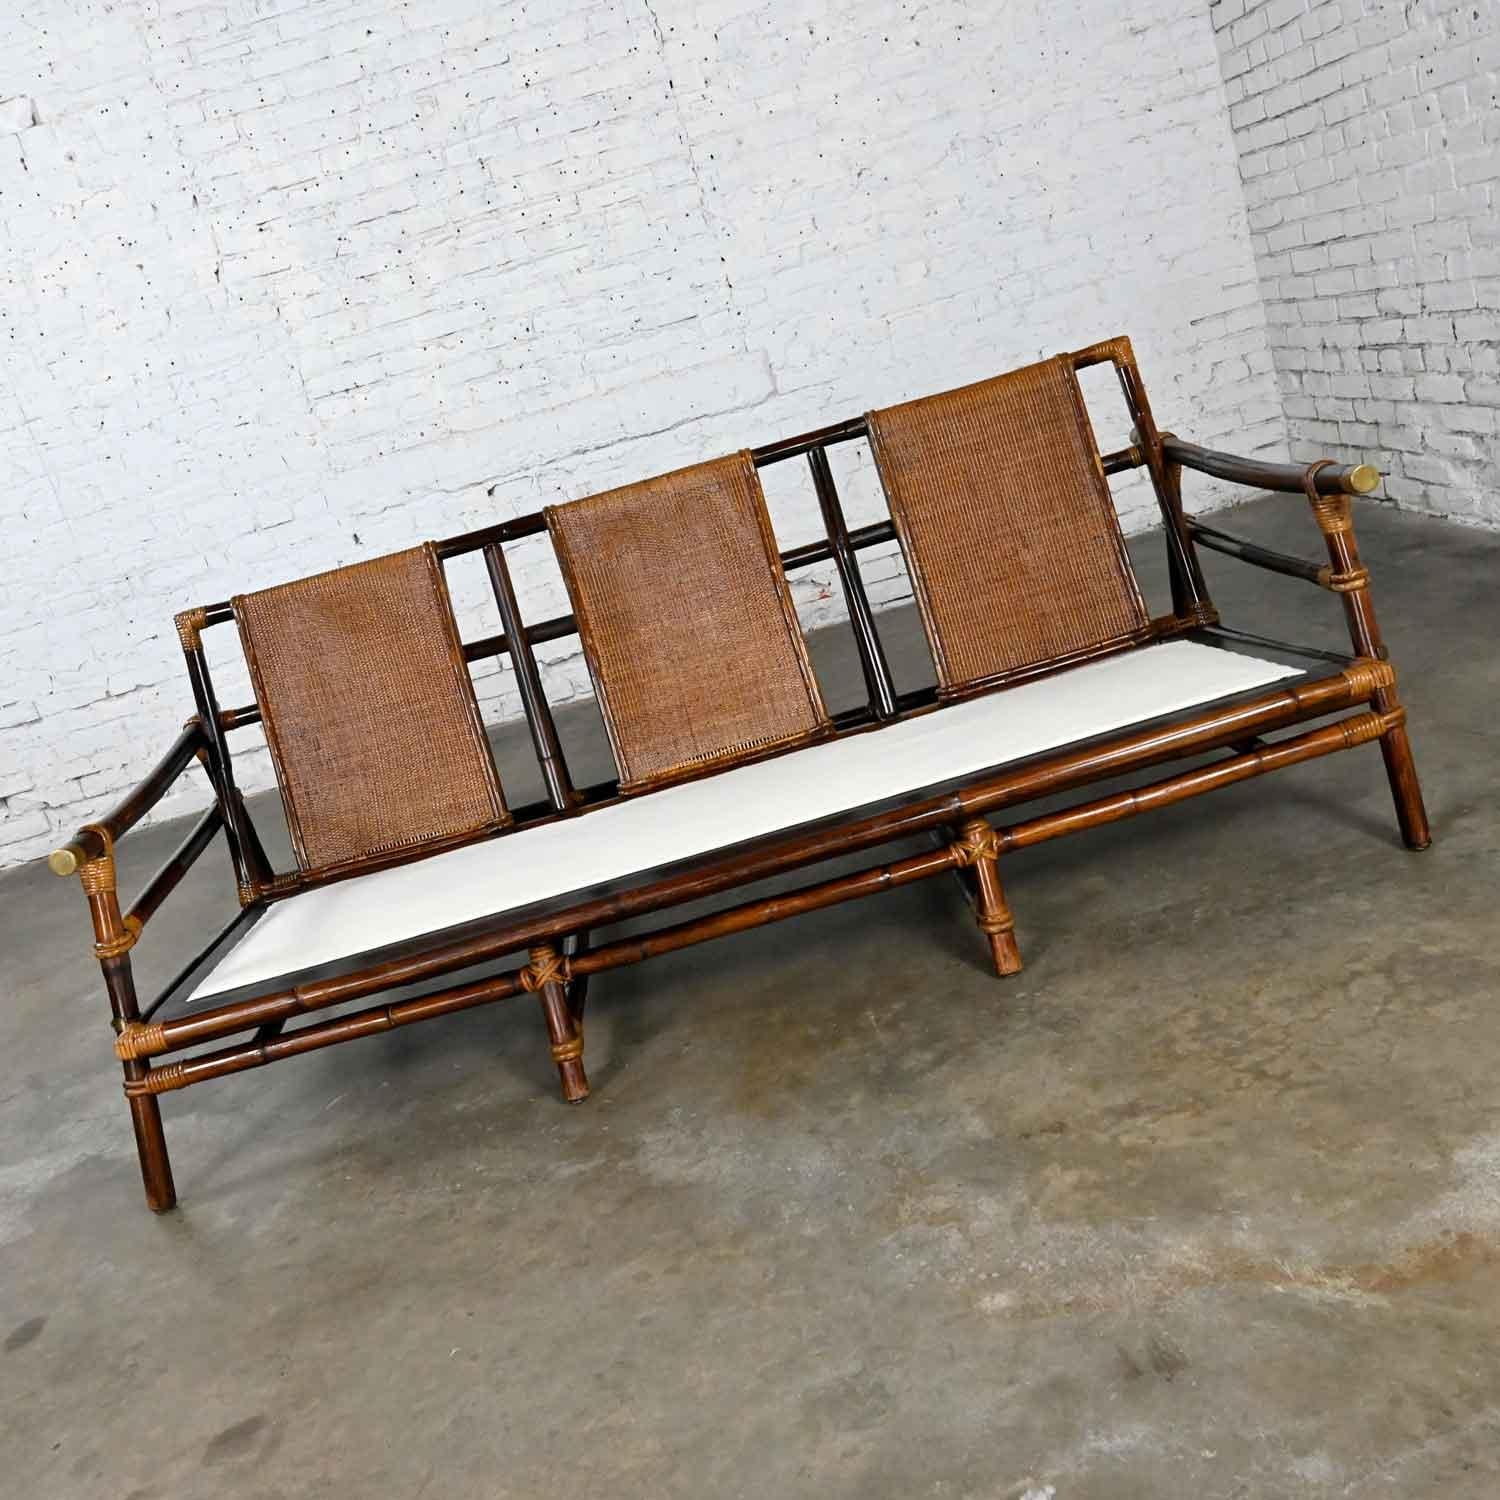 American Rattan Campaign Style Ficks Reed Far Horizon Collection Sofa by John Wisner